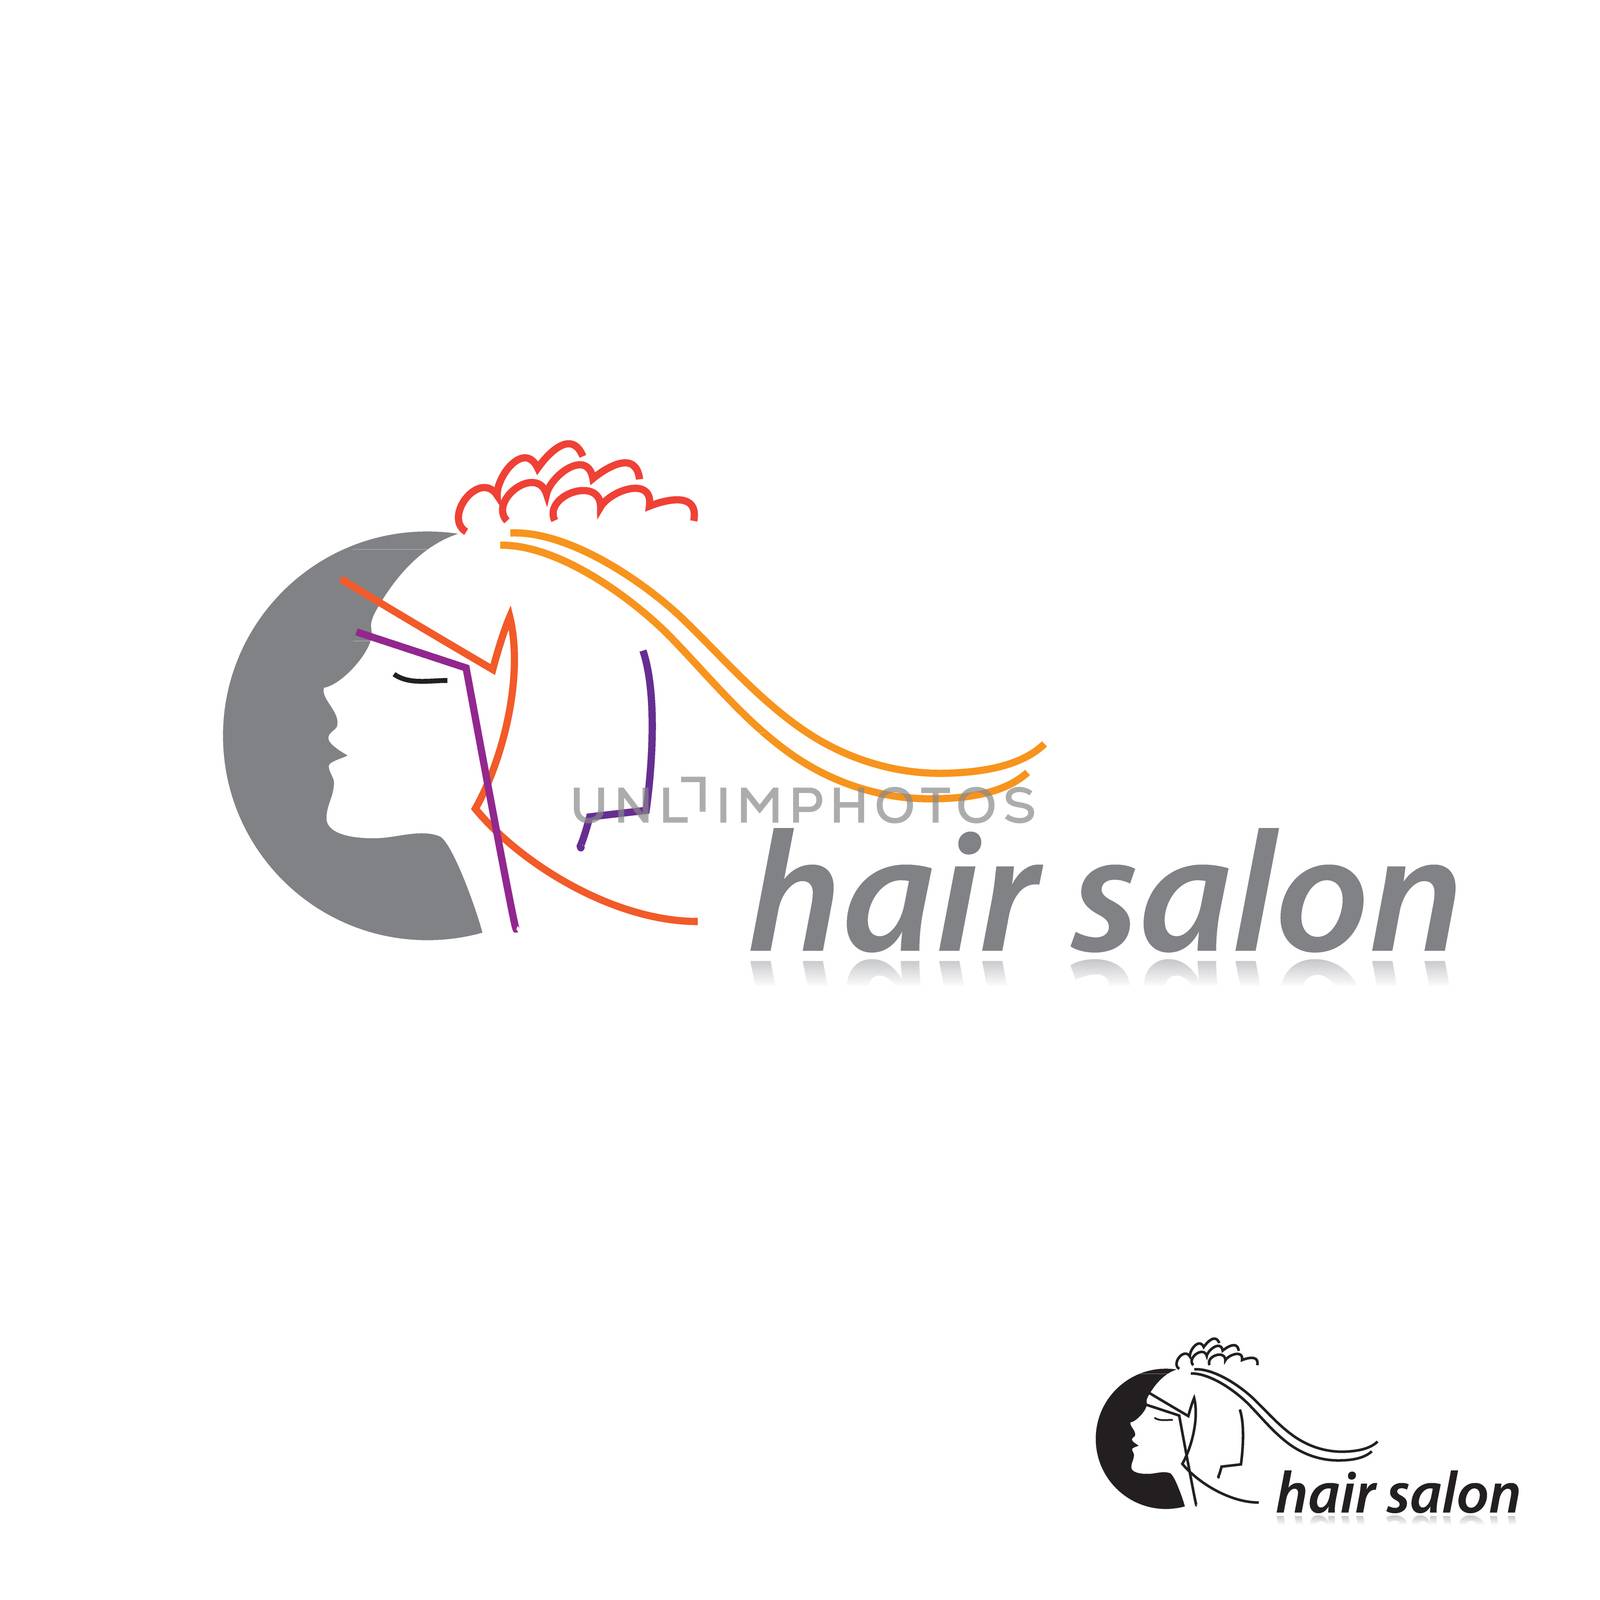 Sign template for a hairdresser's salon.